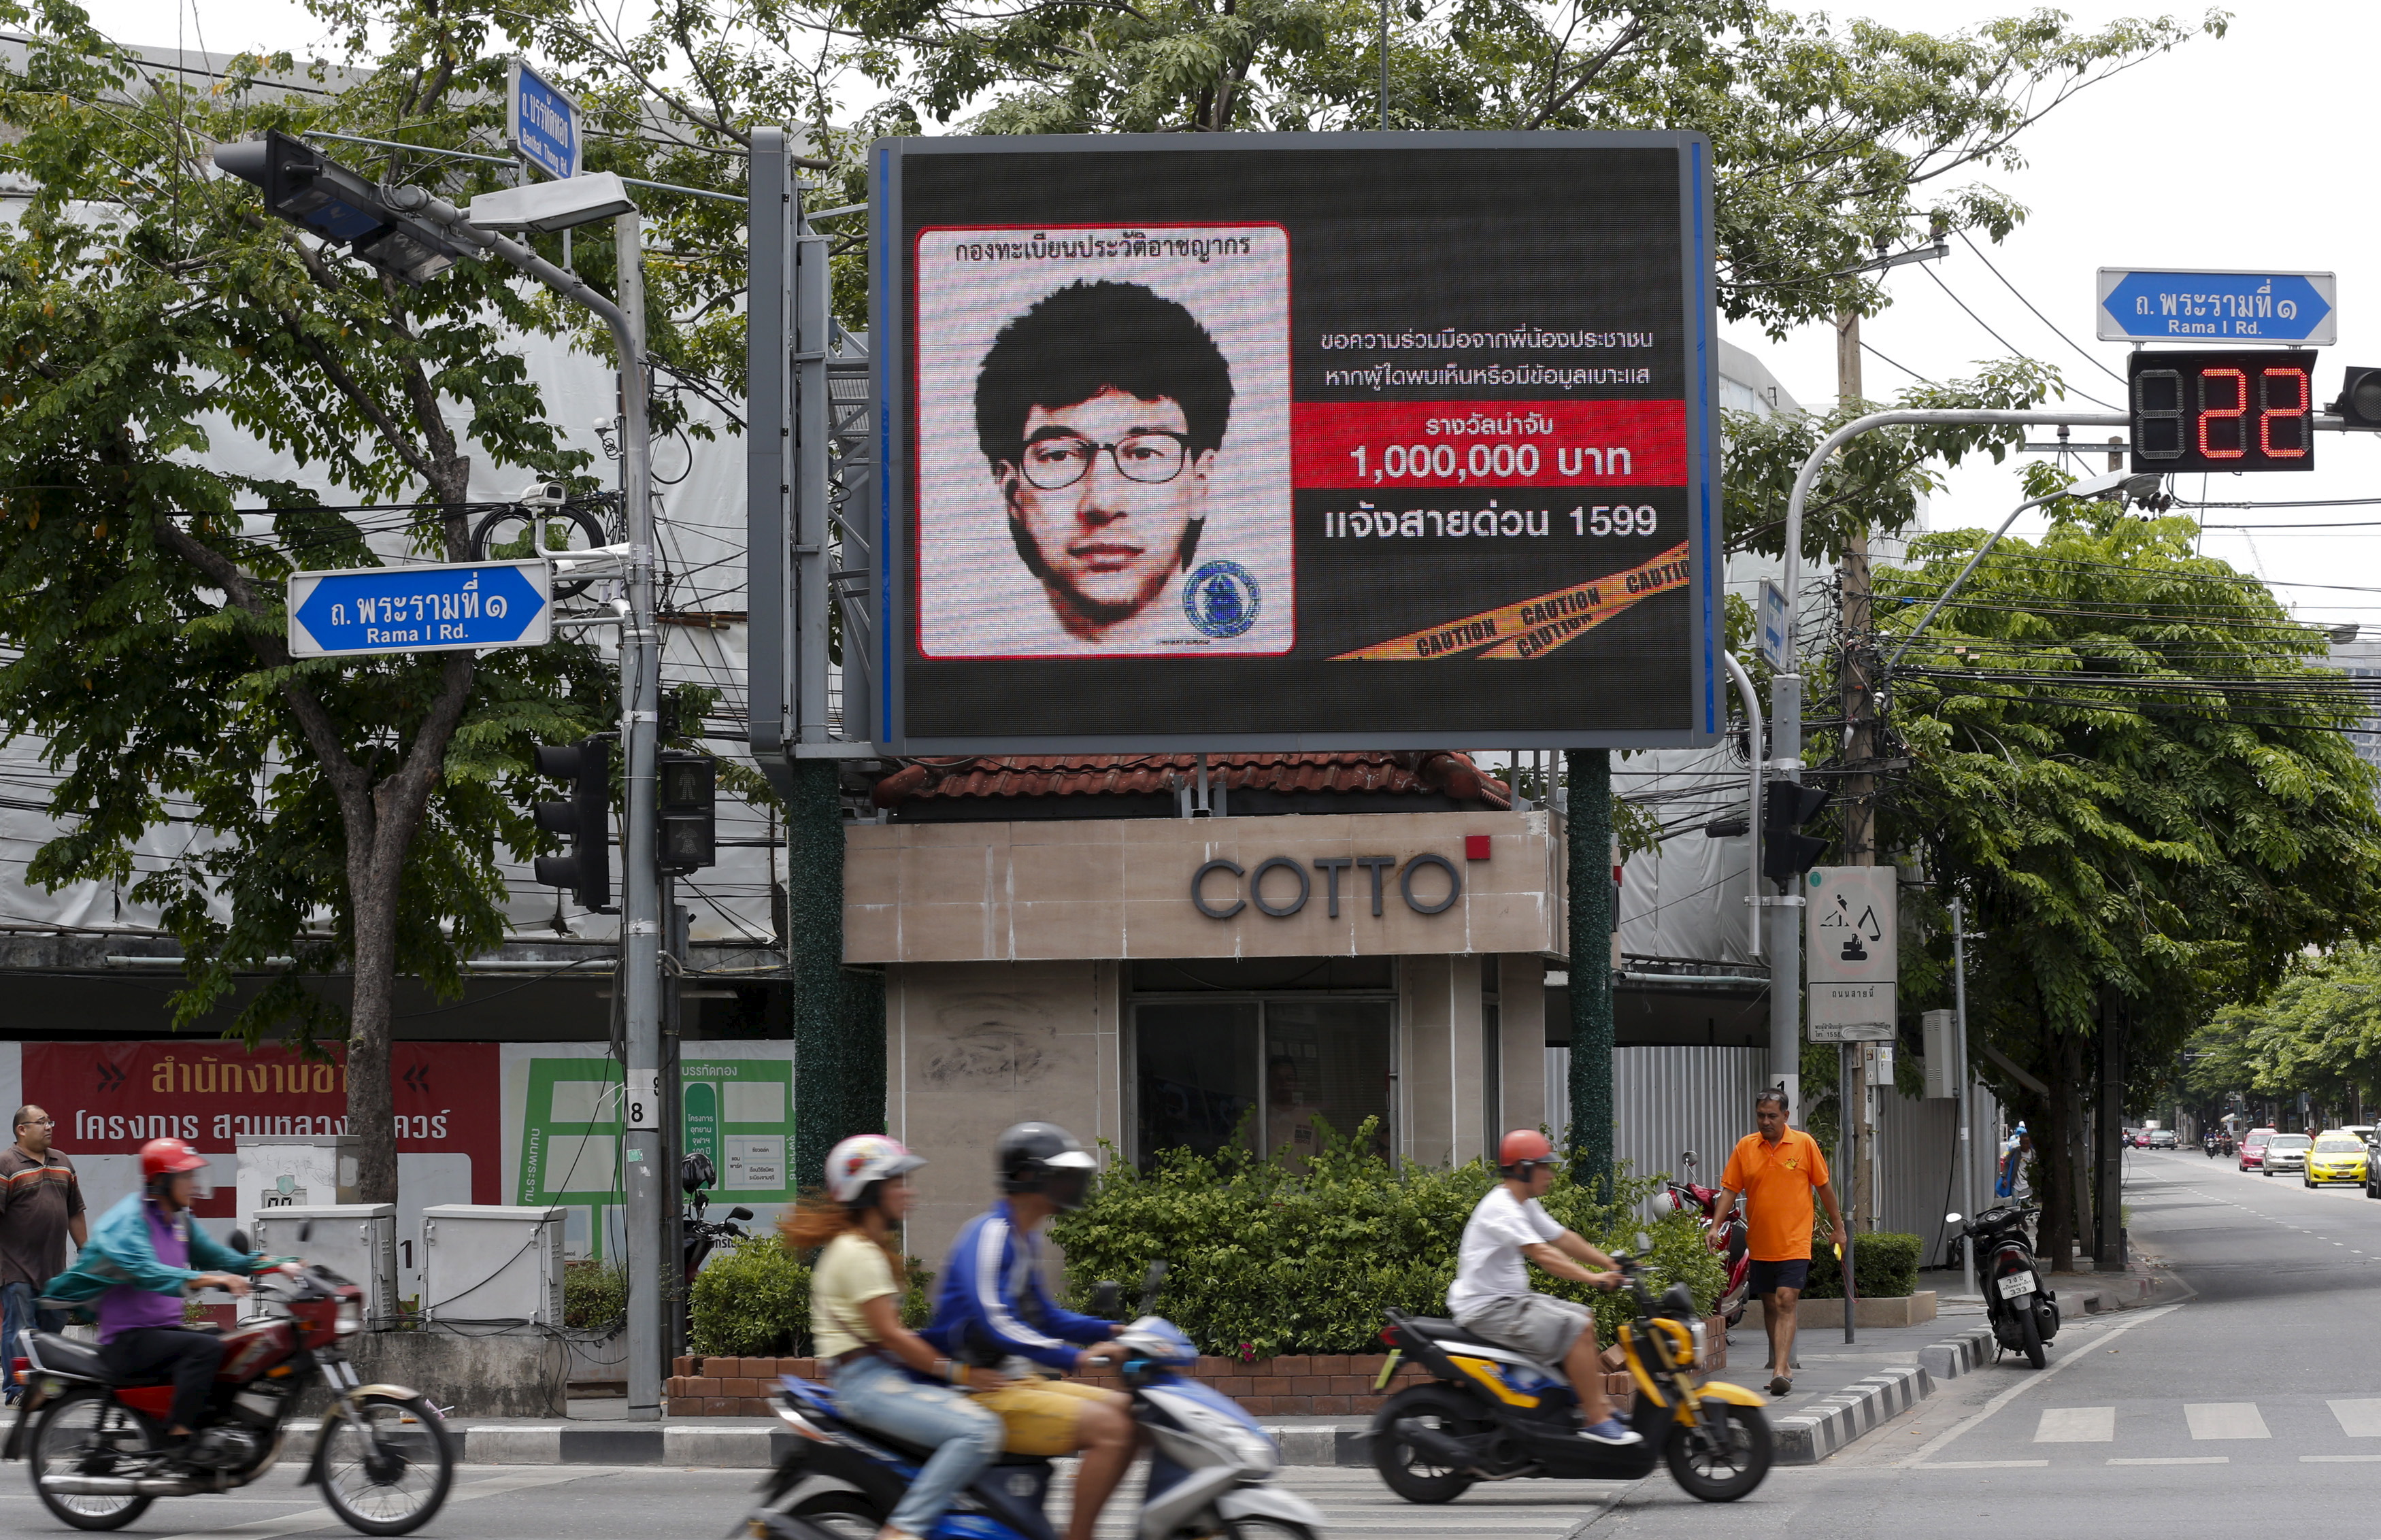 People ride their motorcycles past a digital billboard showing a sketch of the main suspect in Monday's attack on Erawan shrine, in Bangkok, Thailand